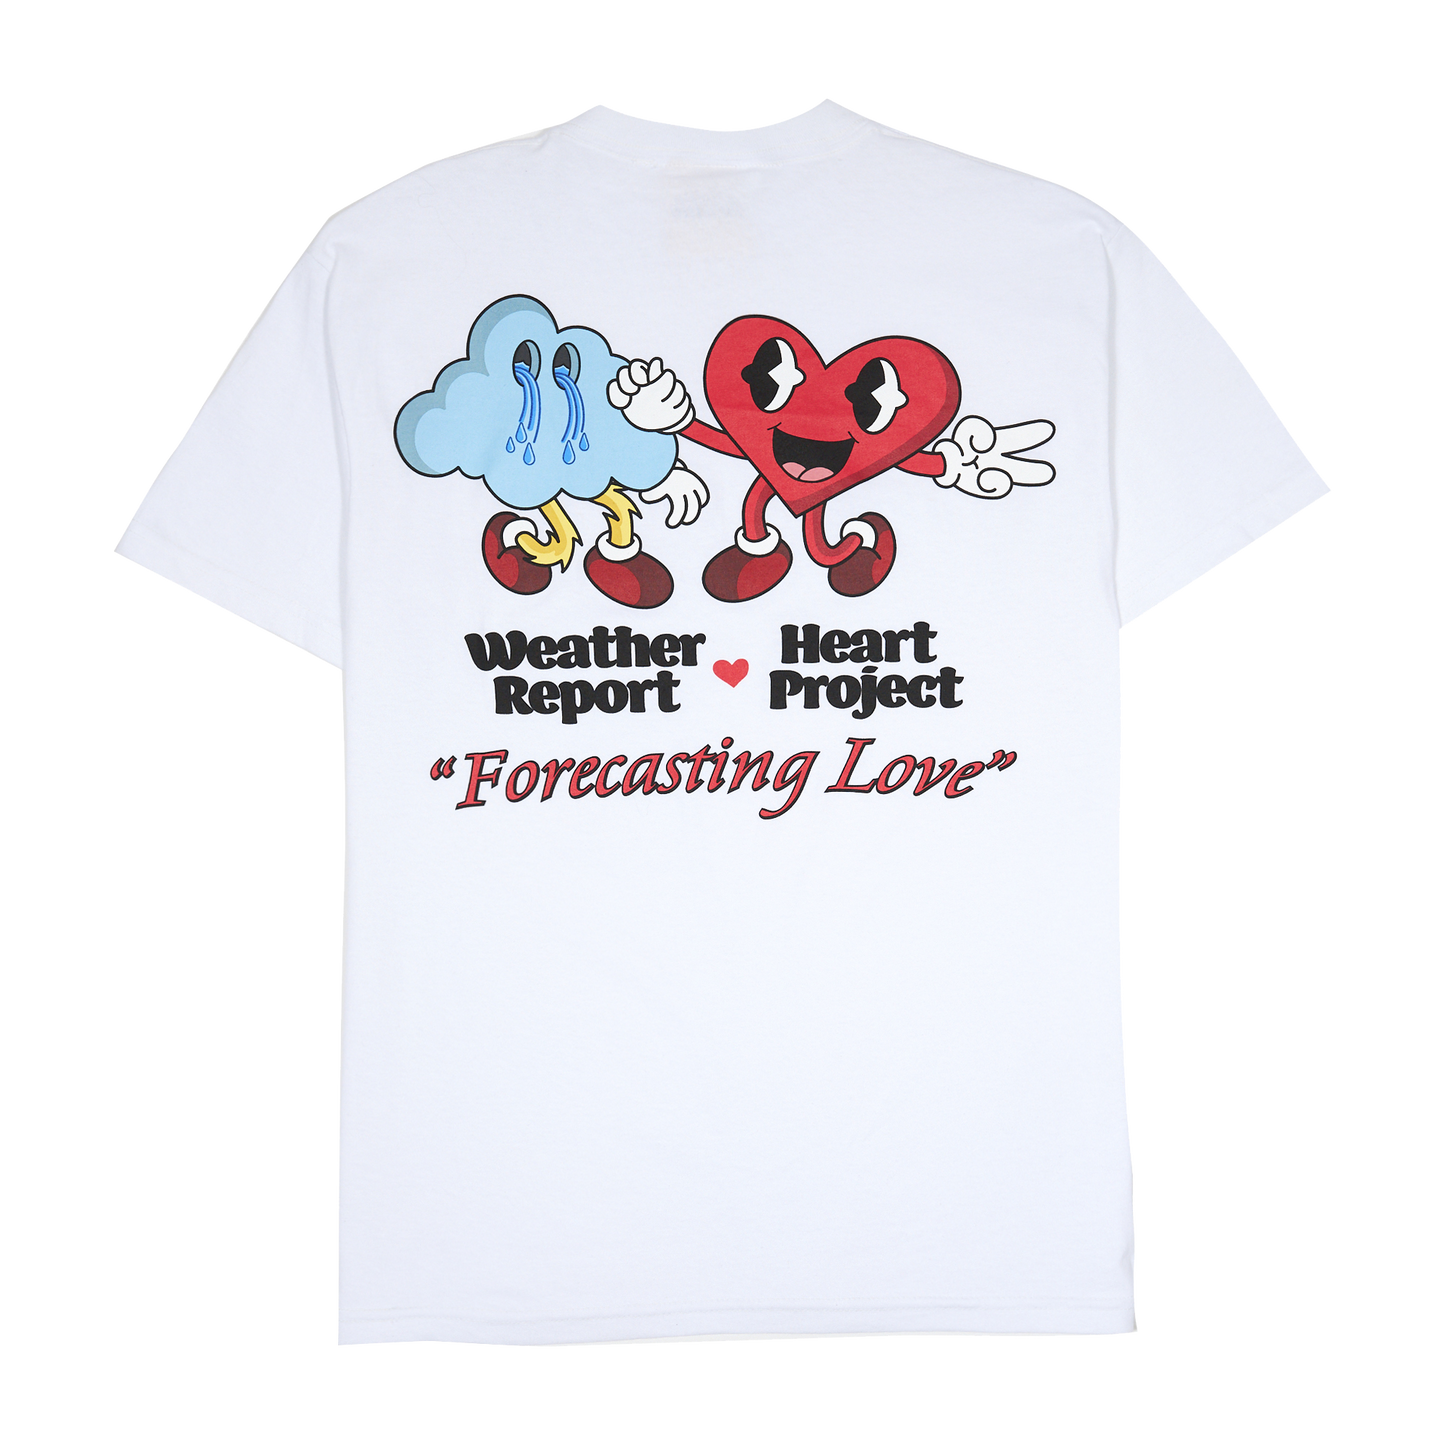 WEATHER REPORT X THE HEART PROJECT - FORECASTING LOVE T-SHIRT